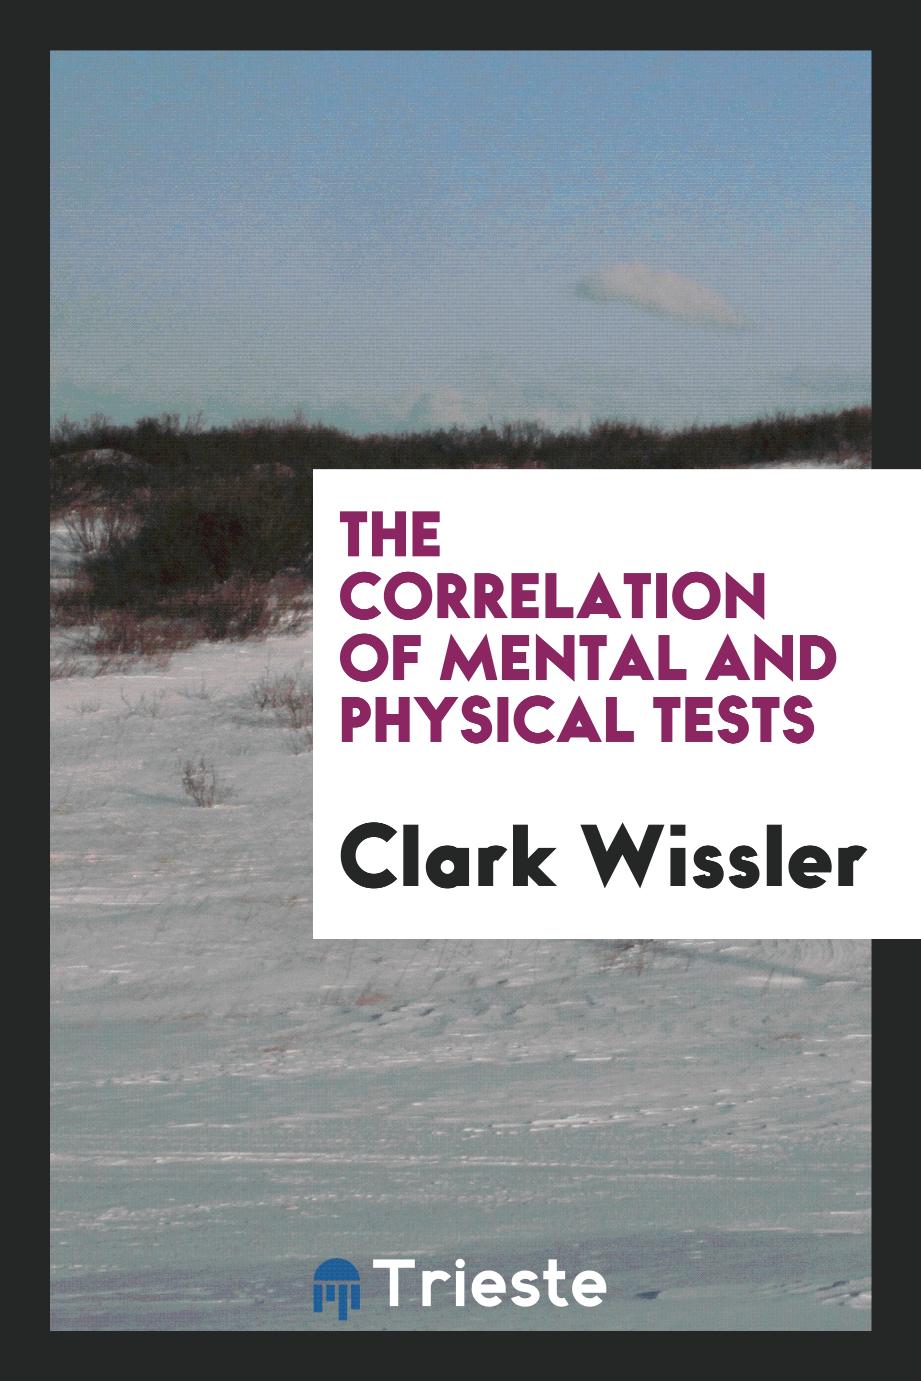 The Correlation of Mental and Physical Tests